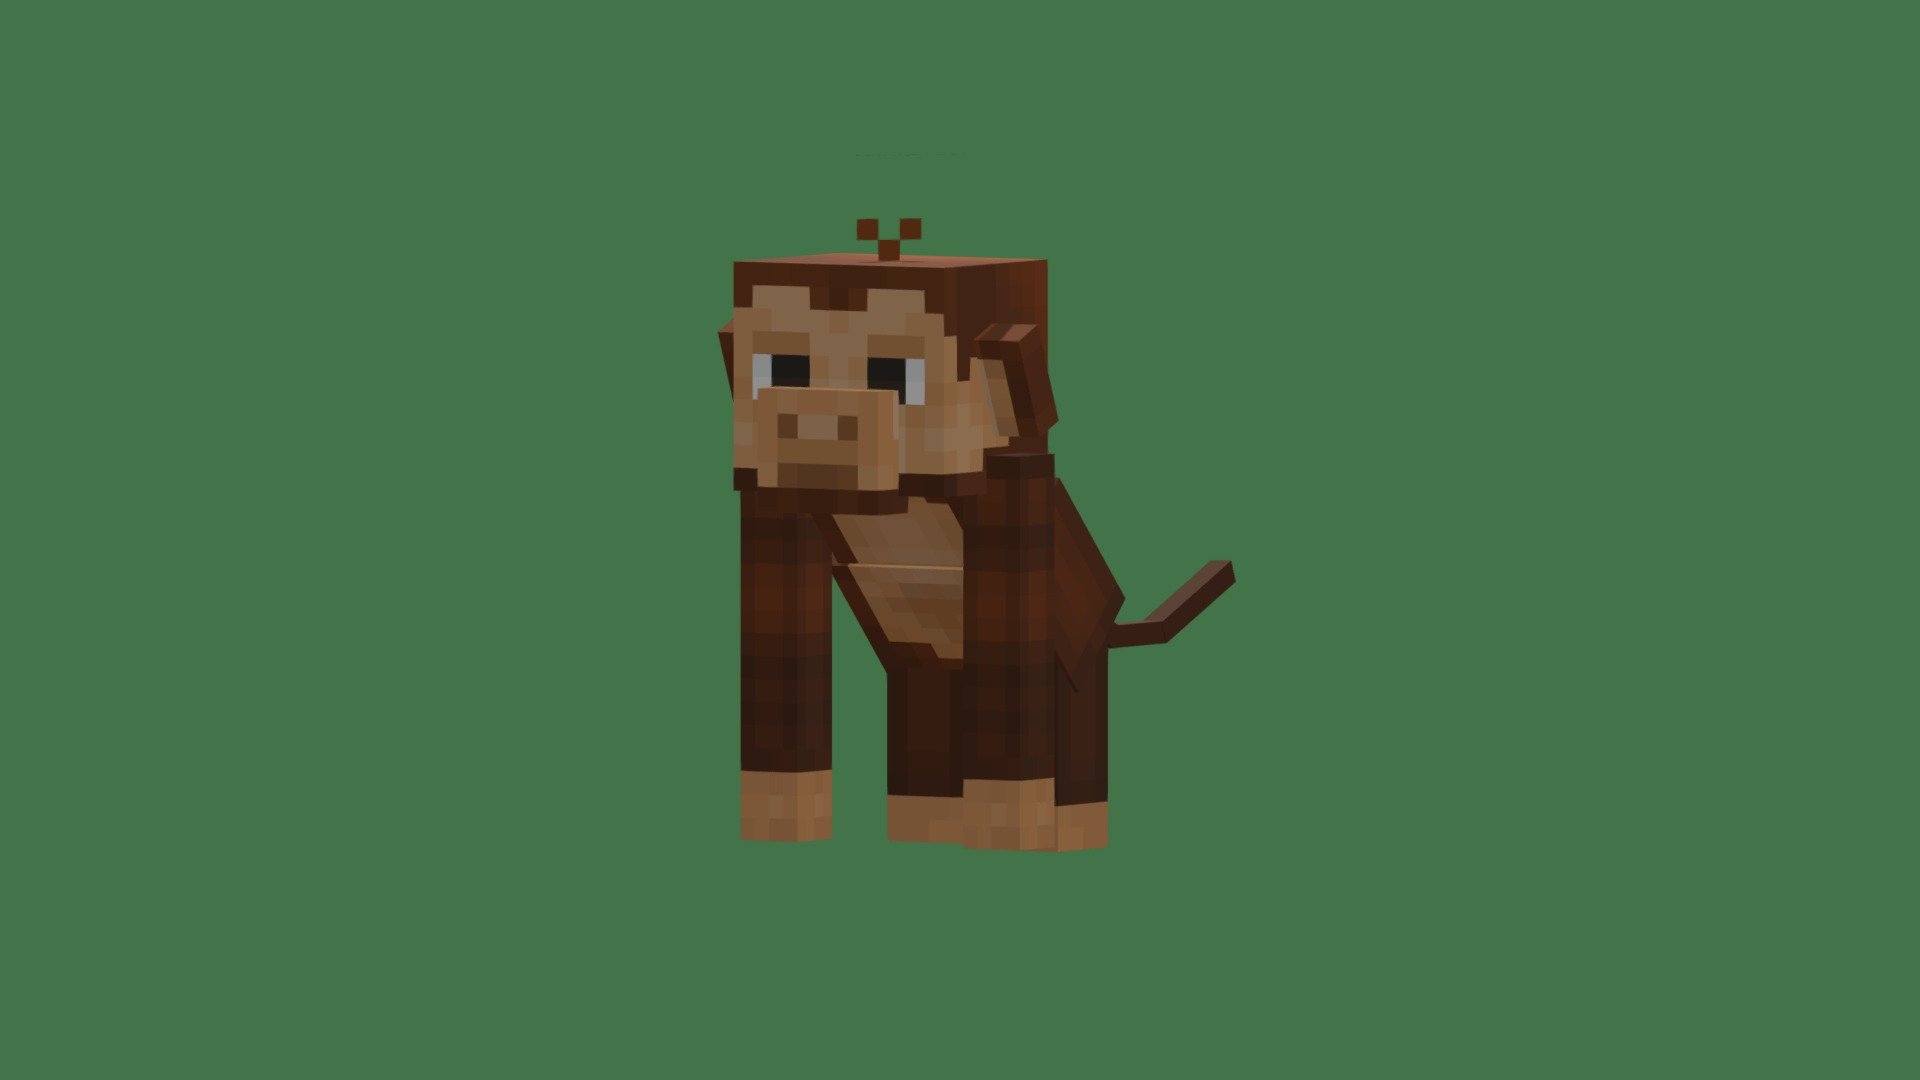 Medium monkey model I created for my minecraft resource pack. It has a special spin attack.
(See spin animation) - Medium Wu Kong Monkey (Minecraft Mob) - 3D model by Bdog / Brandon (@01bdog20) 3d model